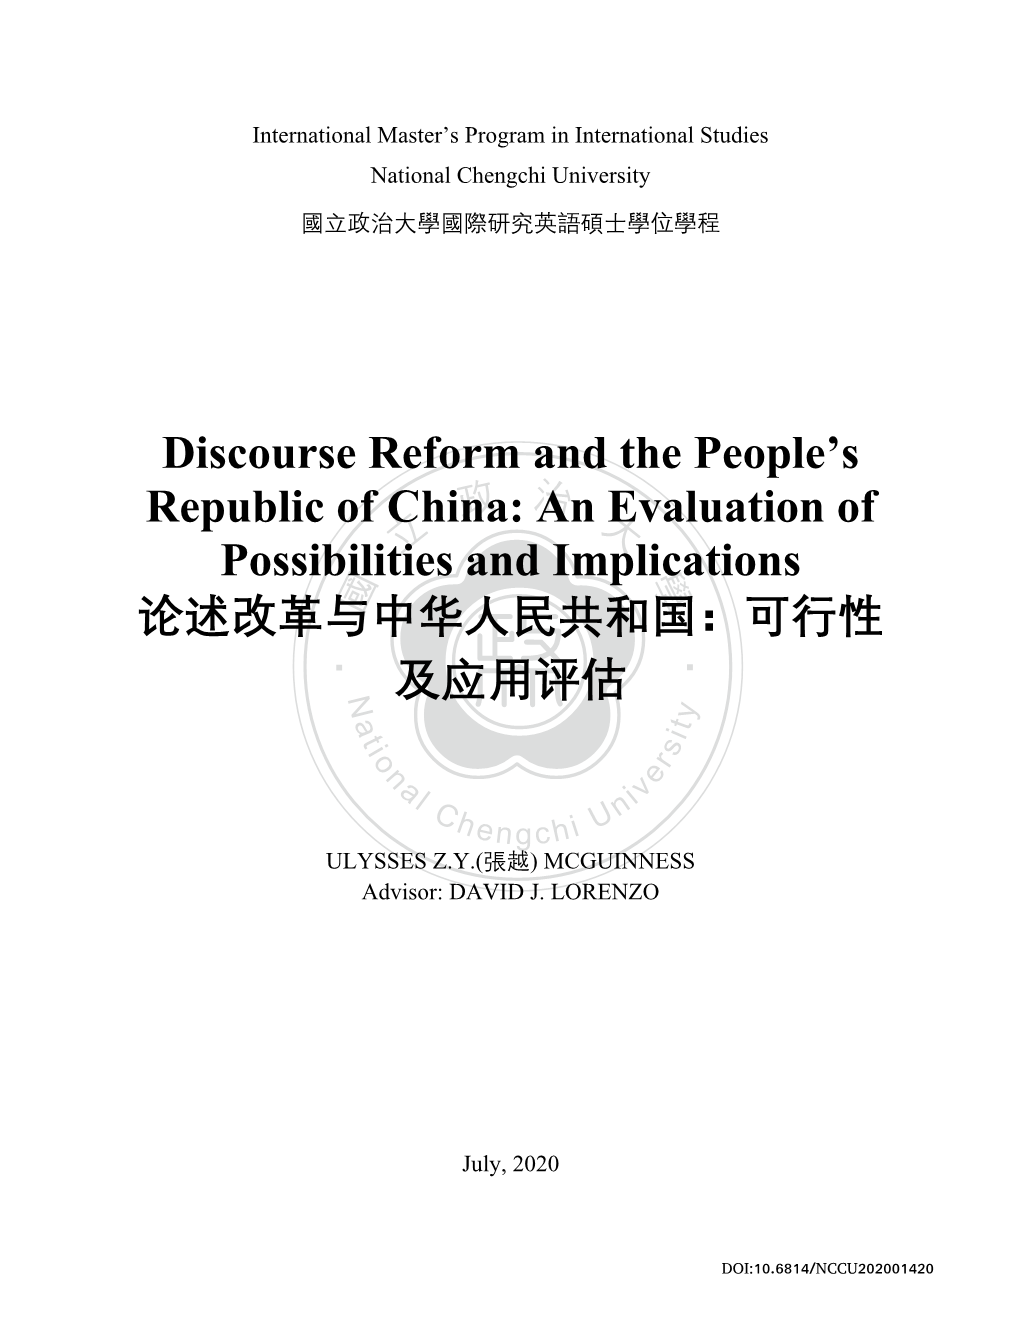 Discourse Reform and the People's Republic of China